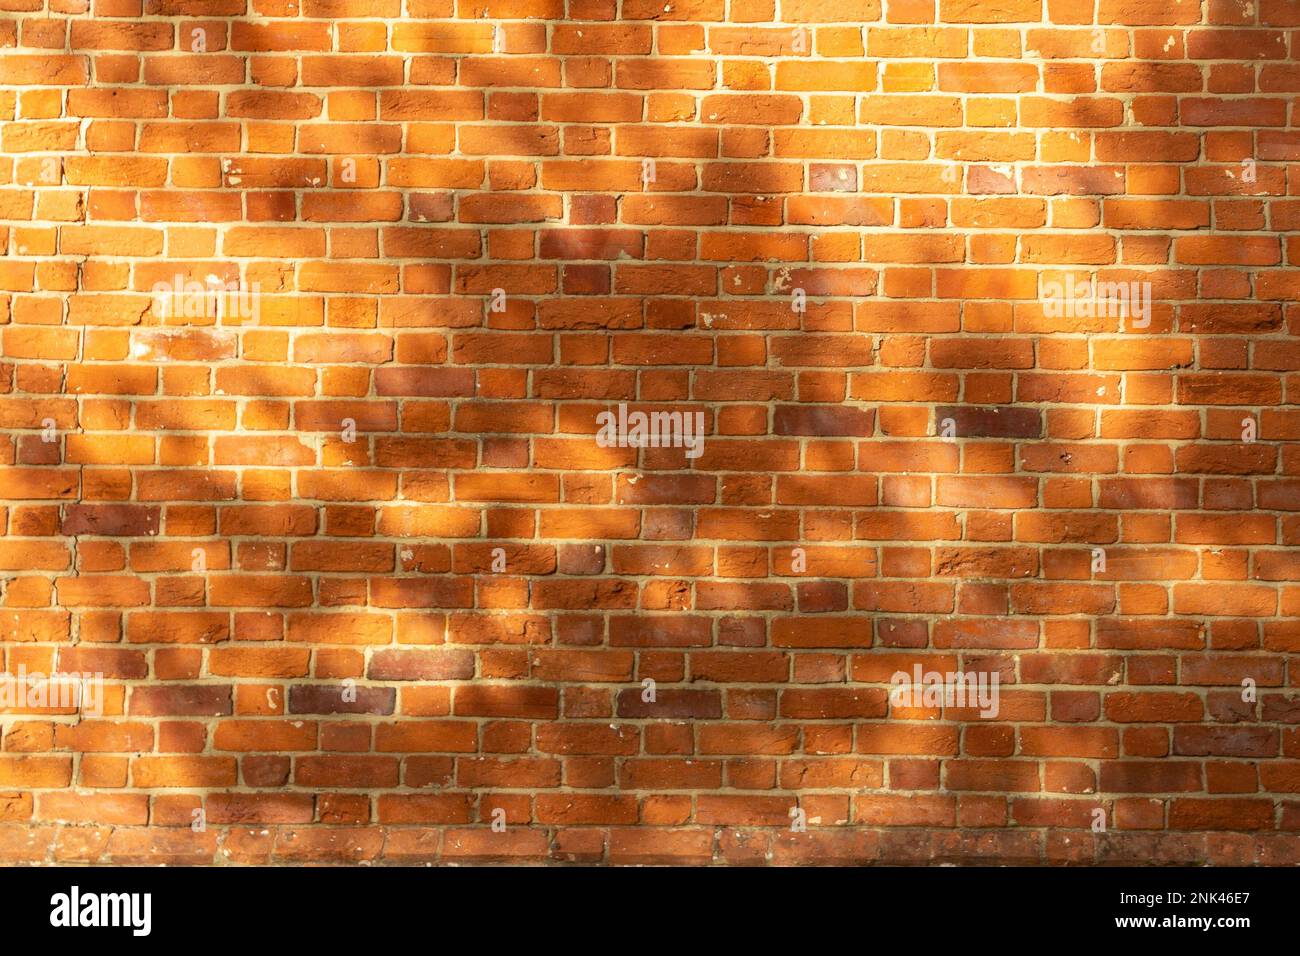 A horizontal image of a red brick wall in sunshine with the shadows of trees in full leaf falling on it, suggesting summer. Background image for text. Stock Photo